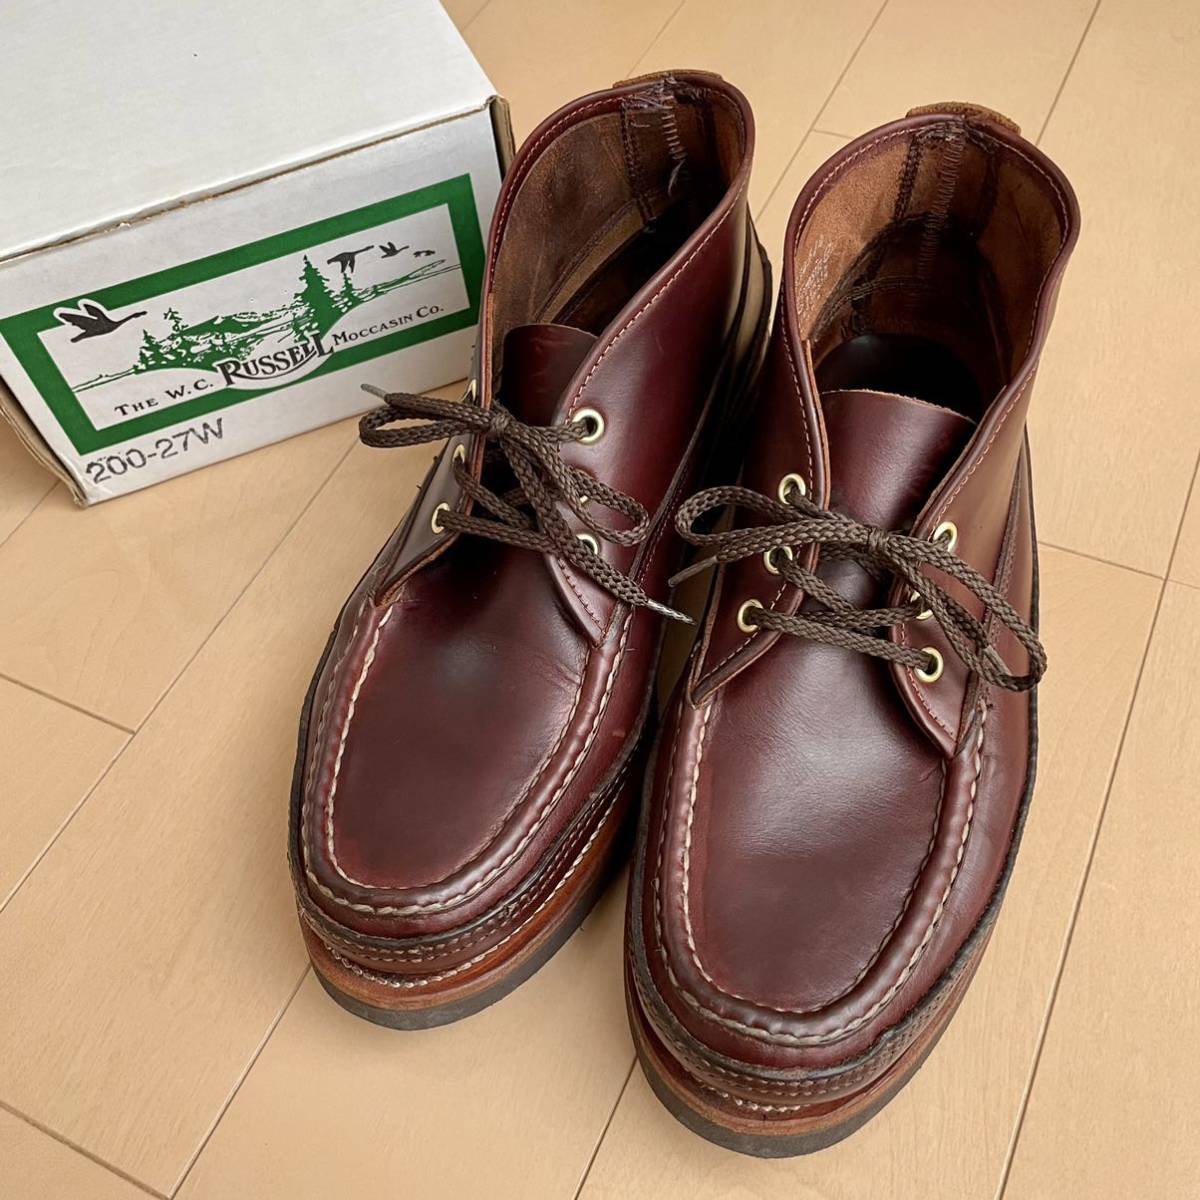 PayPayフリマ｜未使用 russell moccasin sporting clays chukka 8D